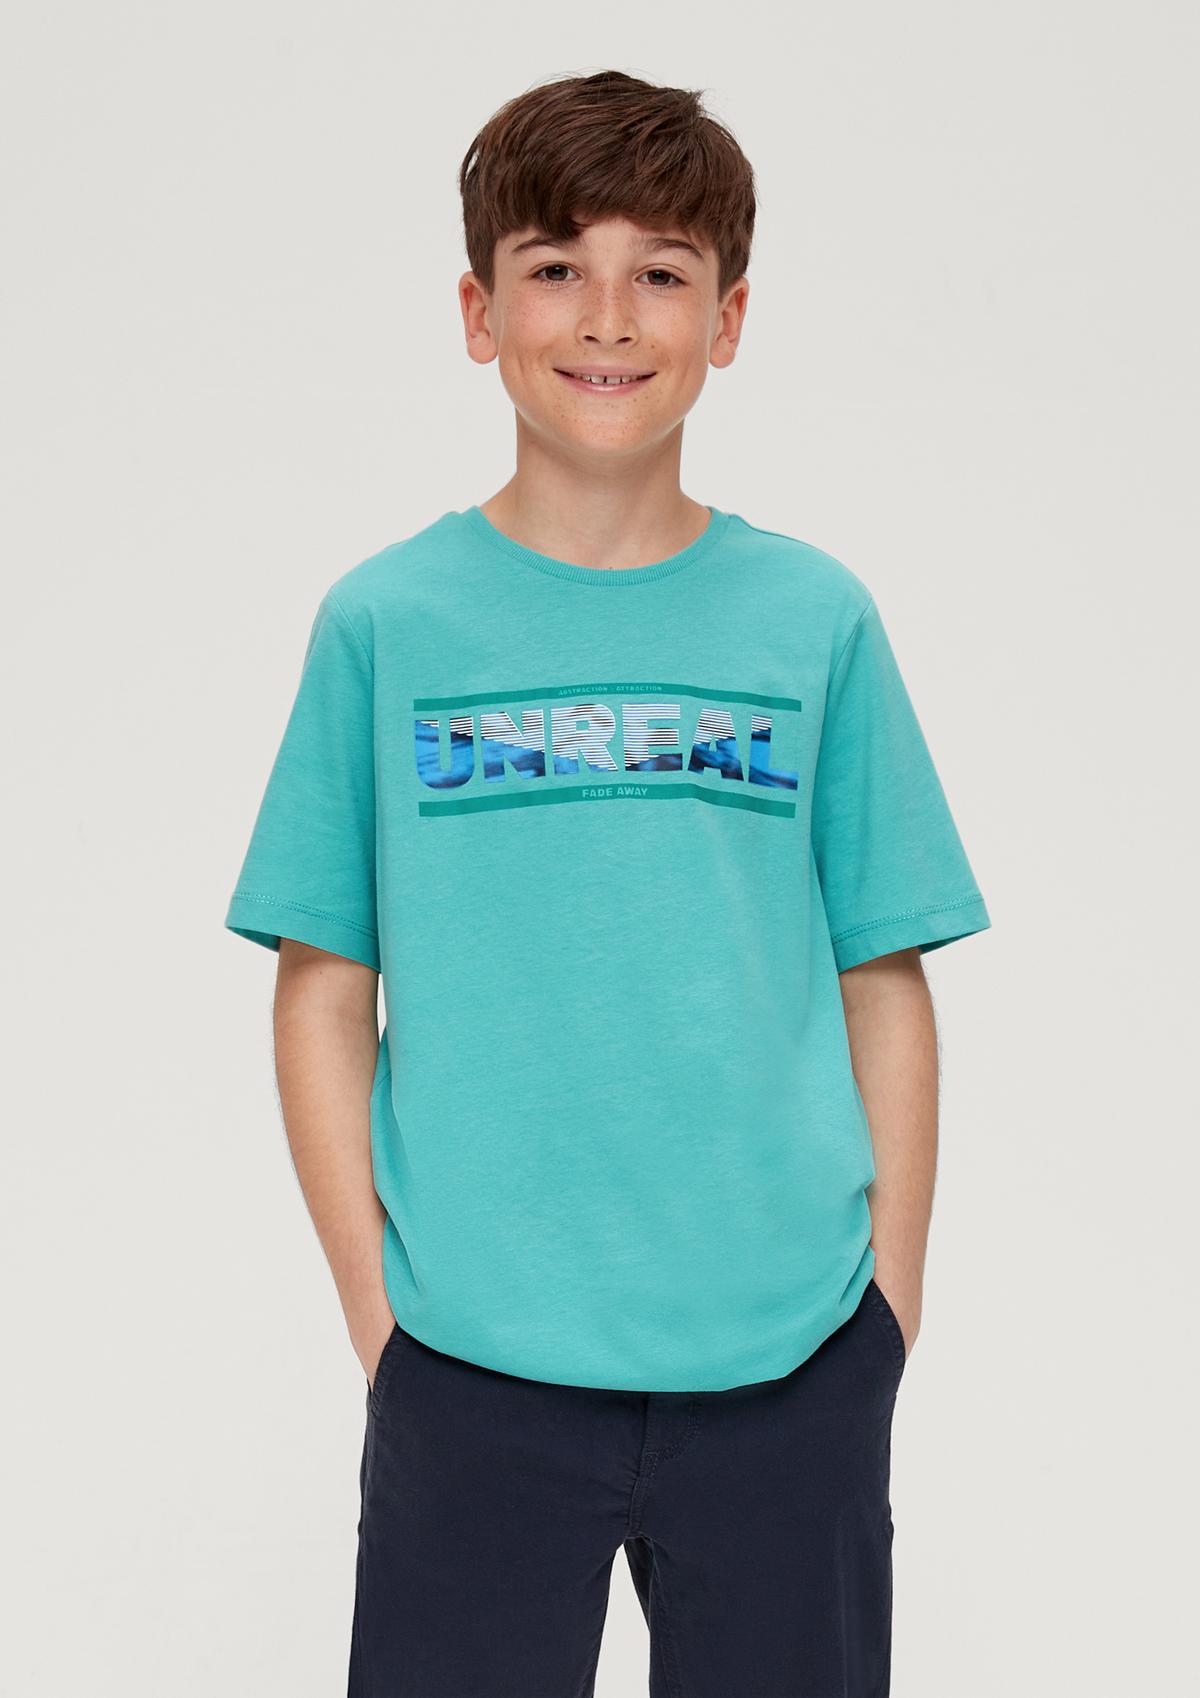 Order T-shirts for boys and online teens